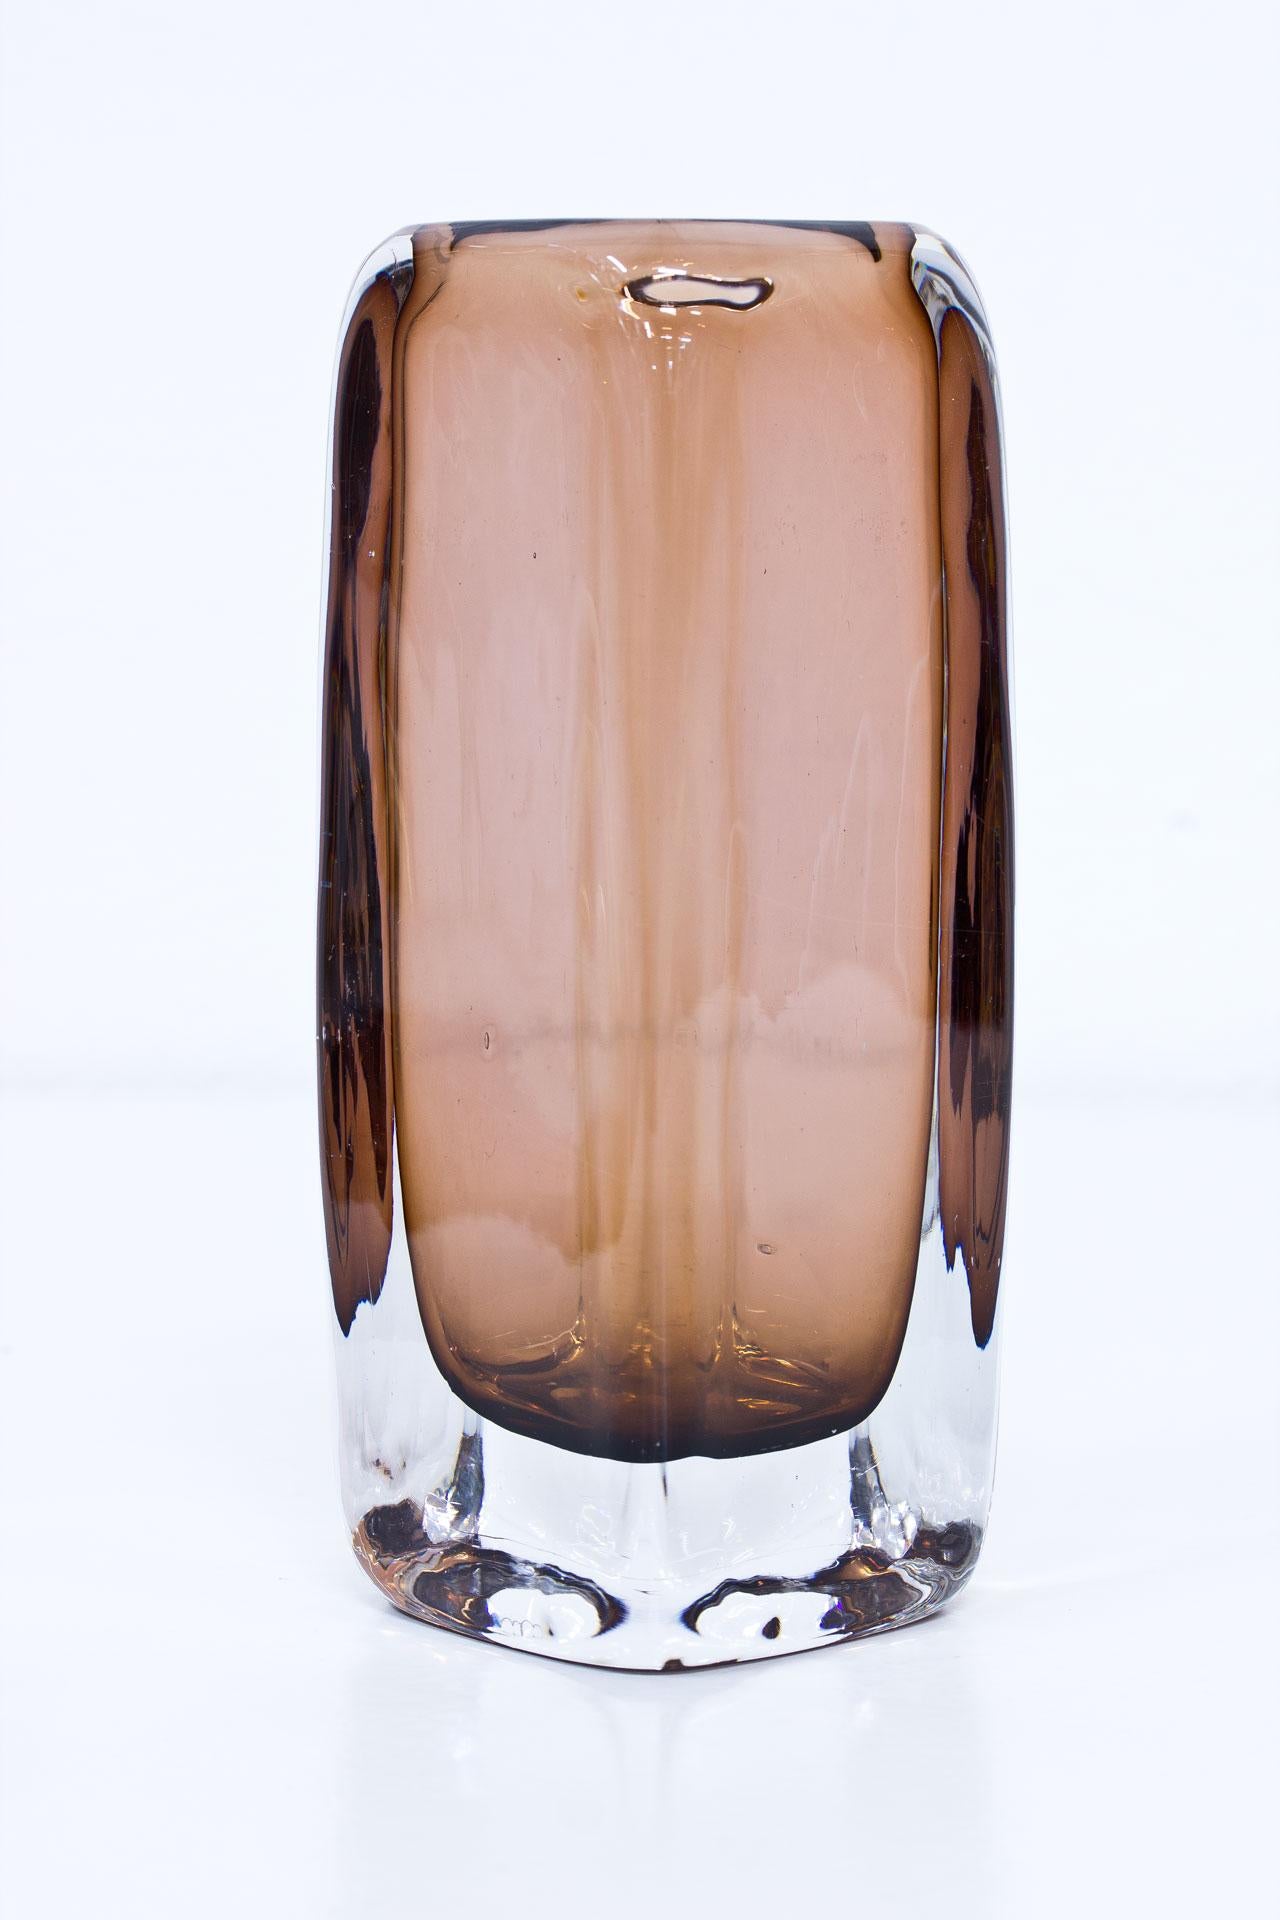 Thick and heavy crystal glass vase designed by Vicke Lindstrand. Manufactured at Kosta glass factory in Sweden during the 1950s. Colored glass cased in clear glass technique. Engraved on bottom.